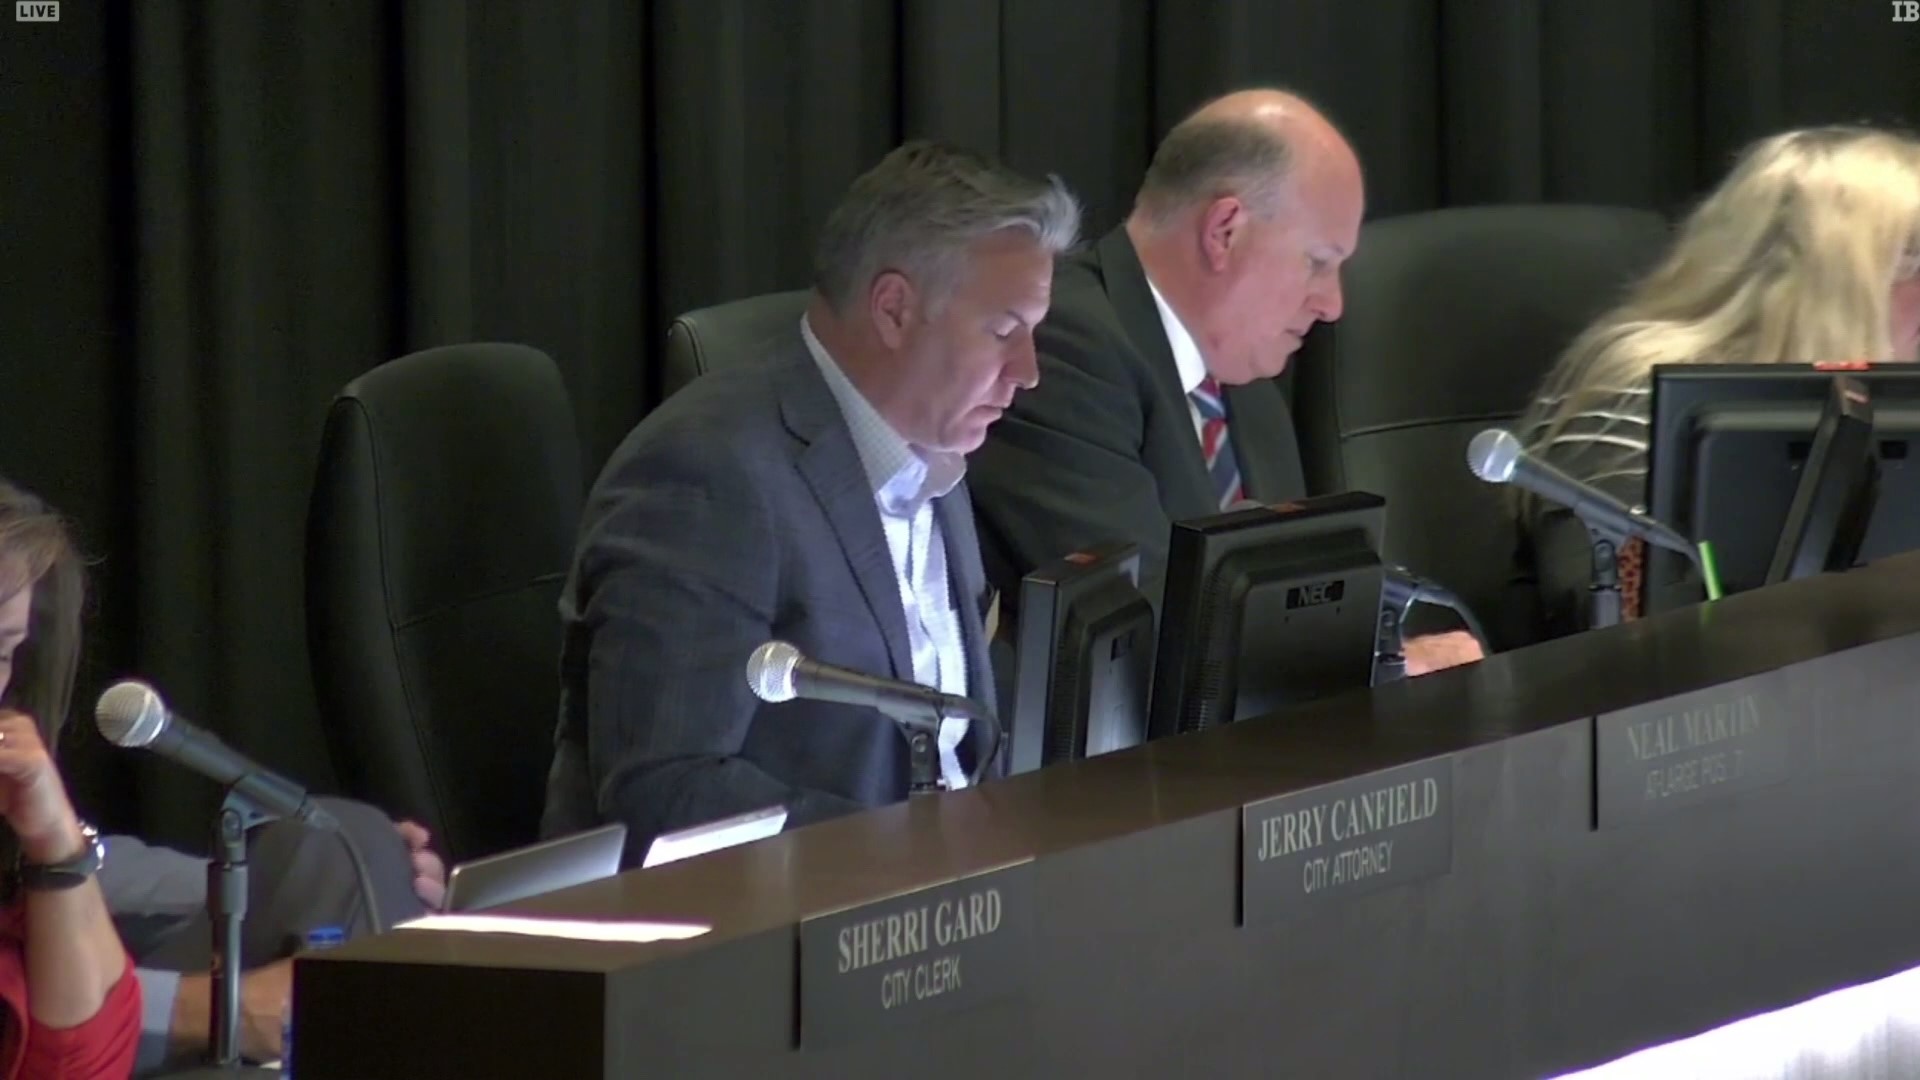 The Fort Smith Board of Directors is considering their first pay increase since 1967. If approved, the pay increase would go into effect this upcoming January.